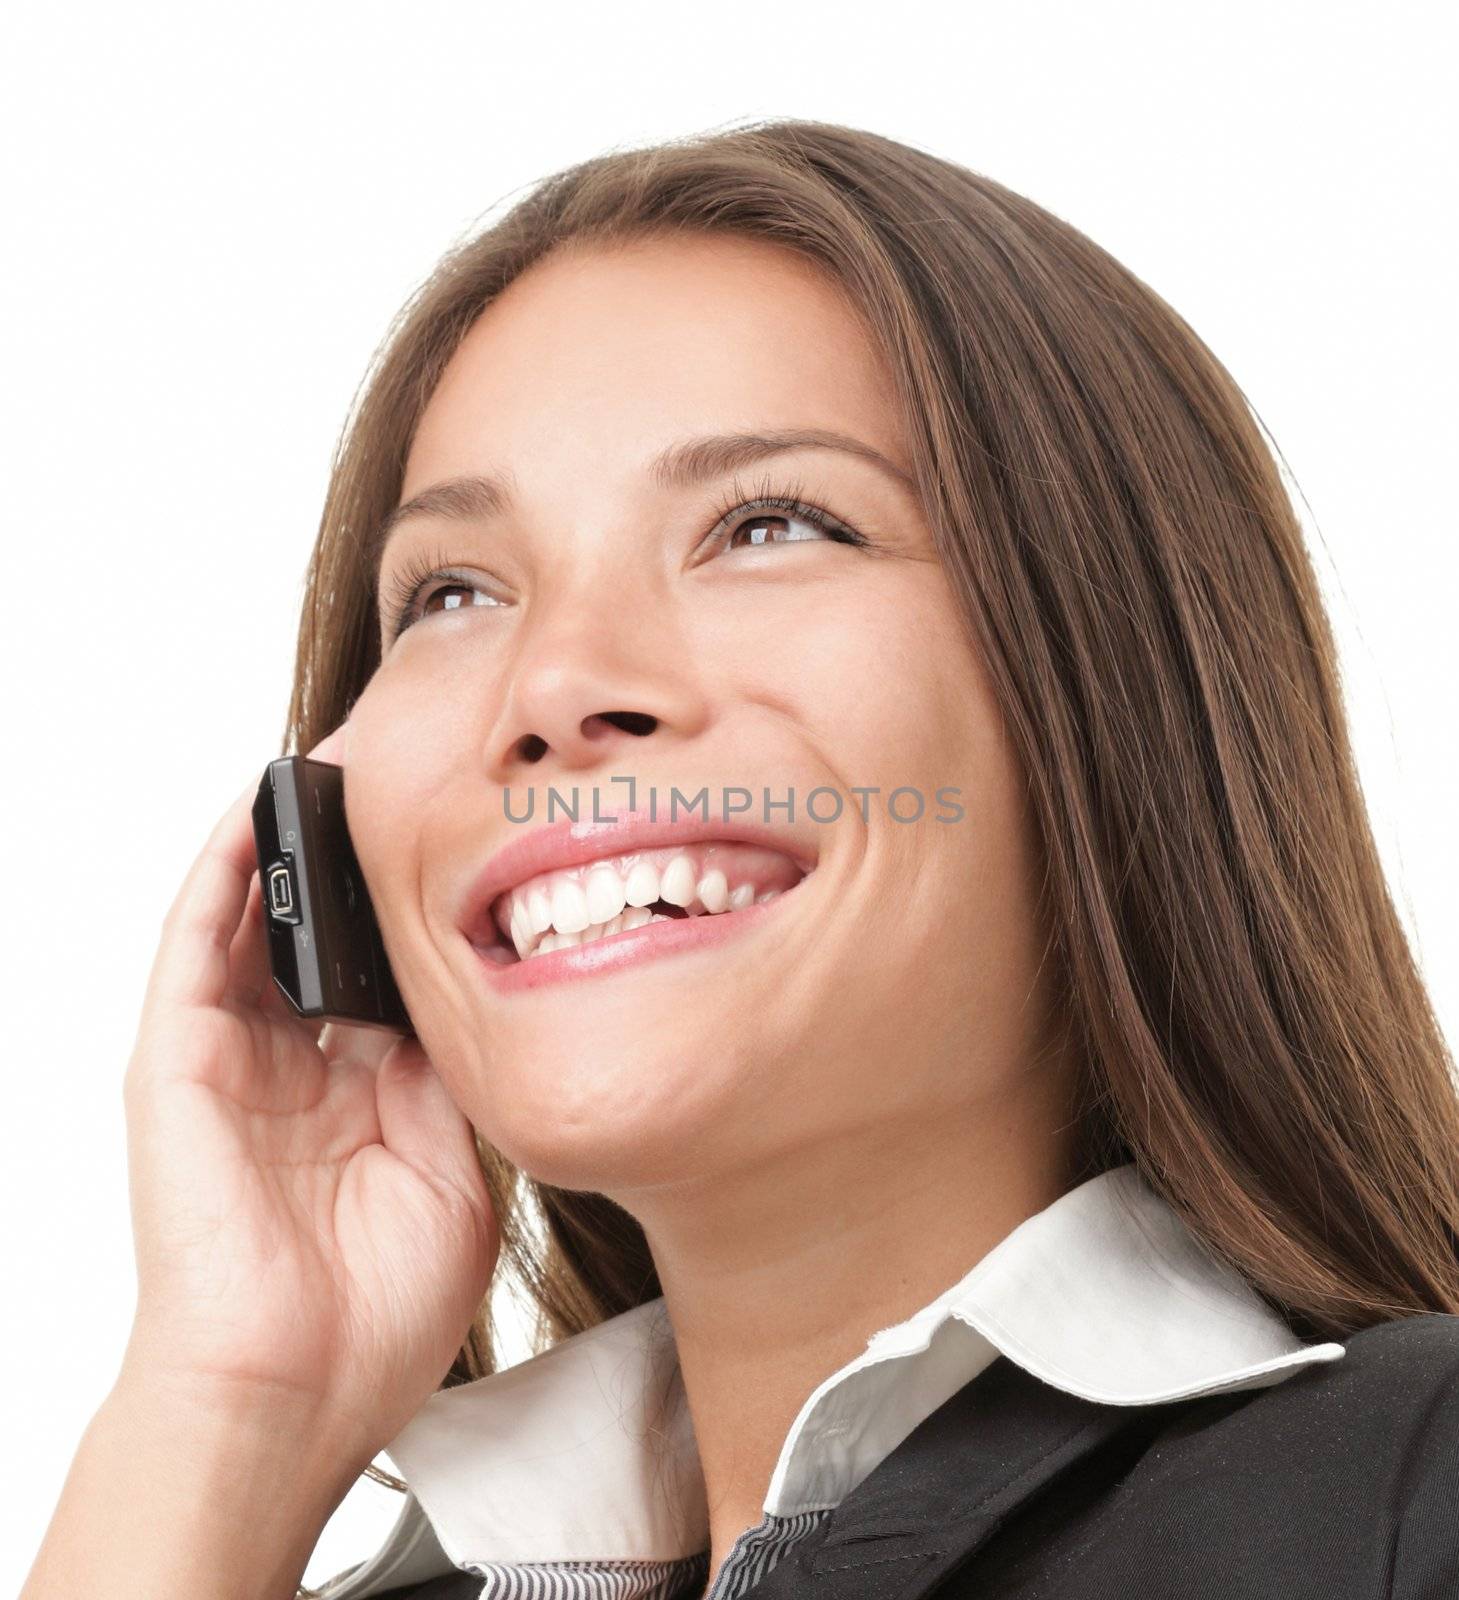 Mobile phone businesswoman. Beautiful business woman talking on cell phone while looking away. Isolated on white background.